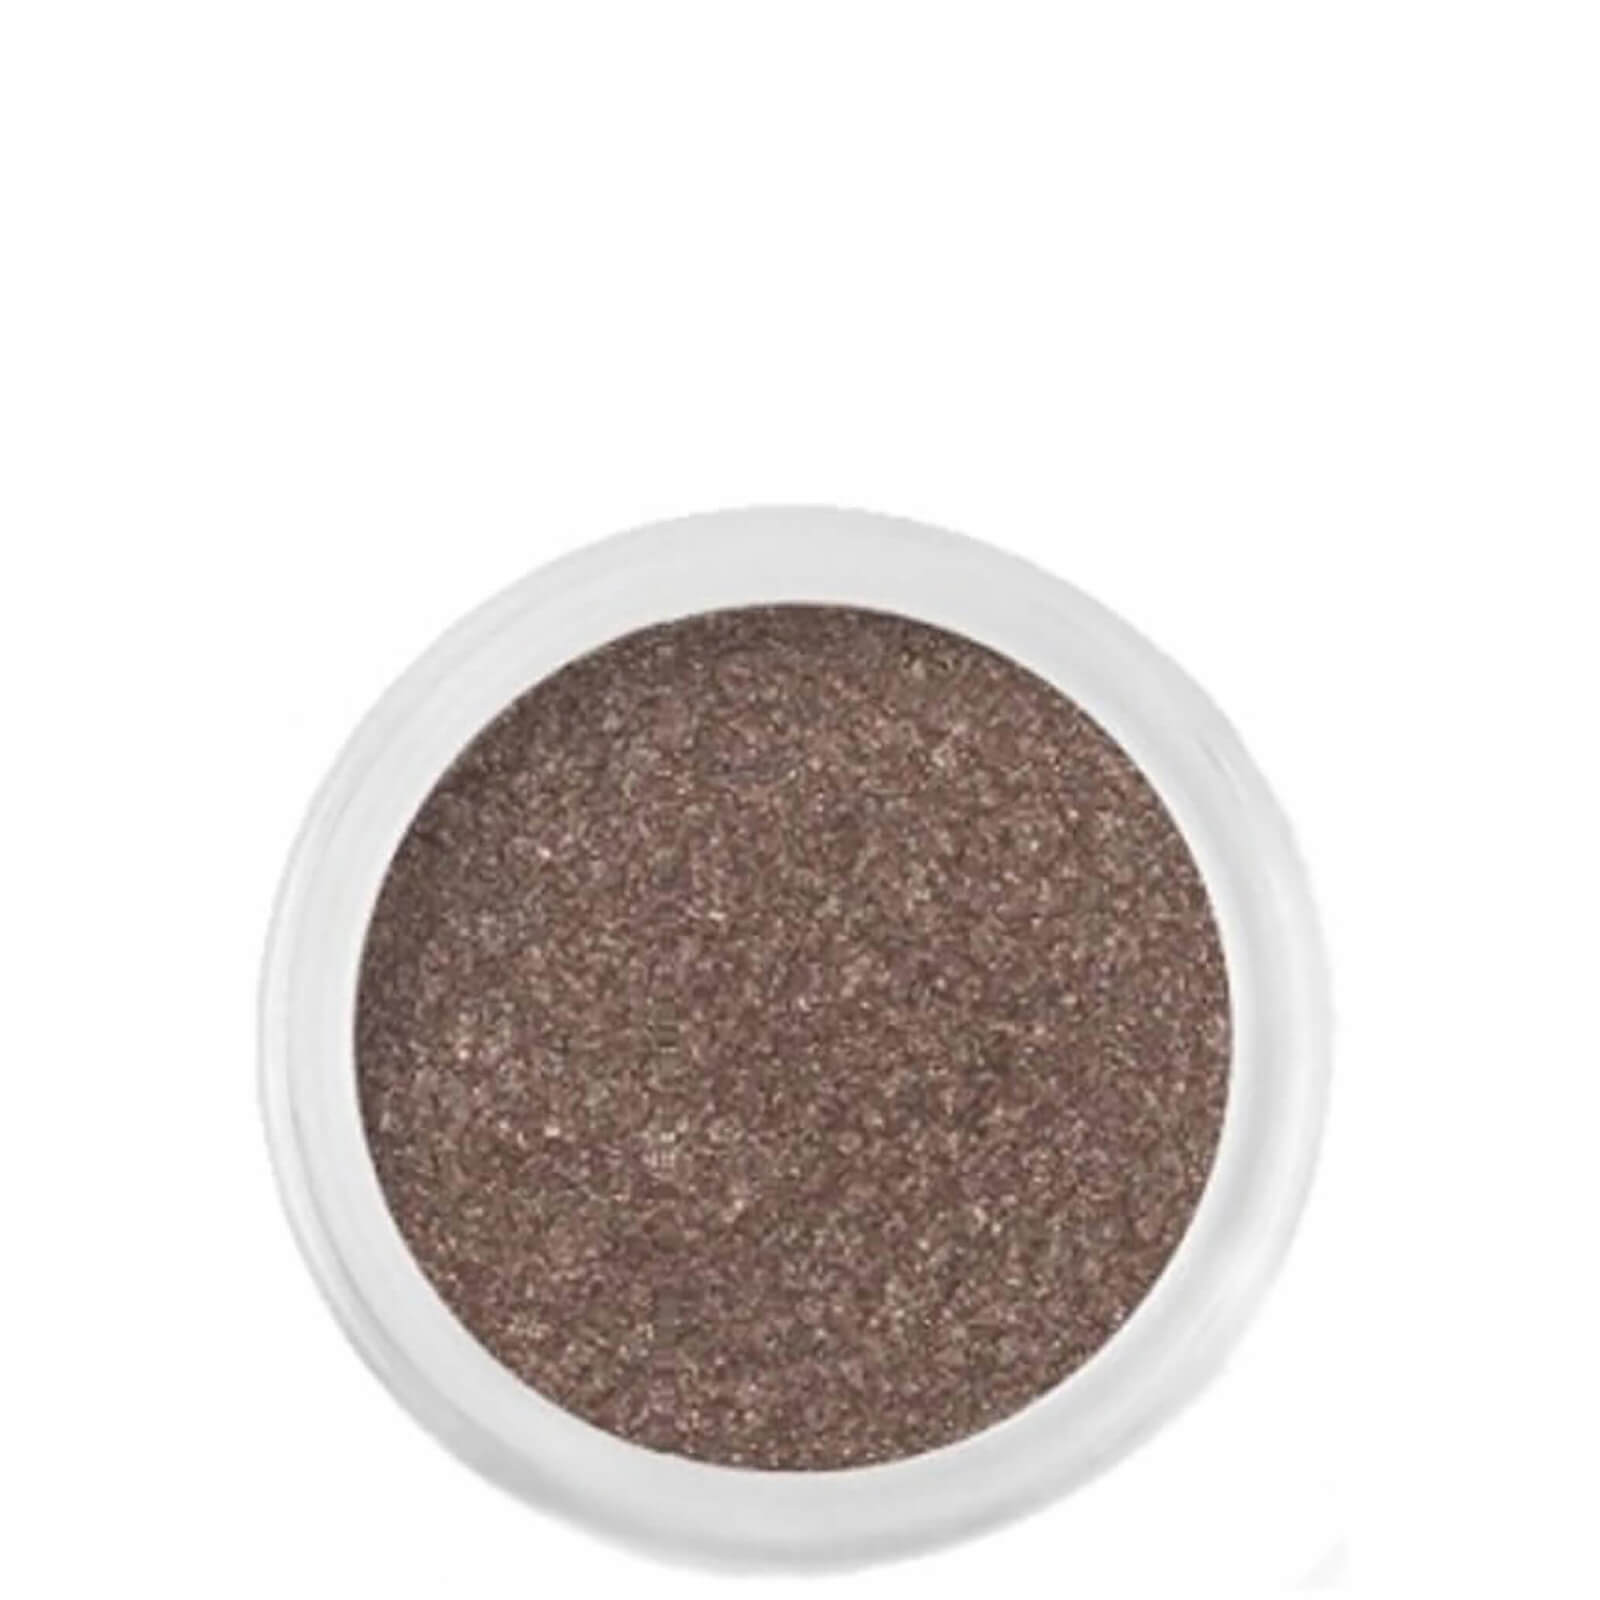 Image of bareMinerals Glimmer - Queen Tiffany (0.57g)